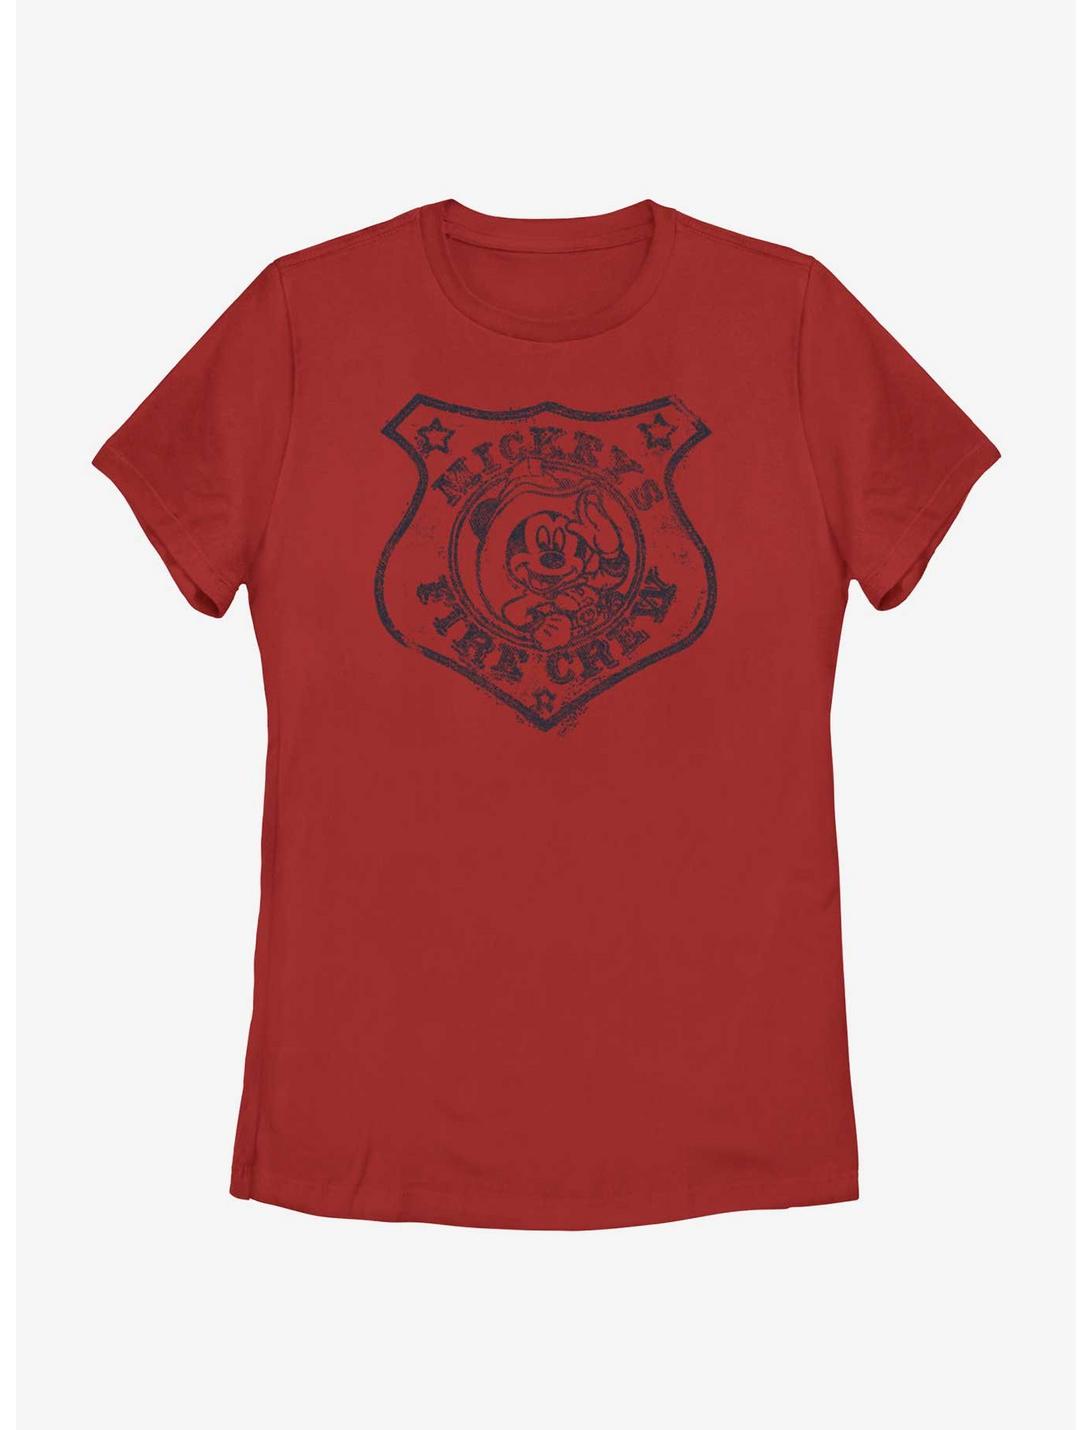 Disney Mickey Mouse Mickey's Fire Crew Badge Womens T-Shirt, RED, hi-res